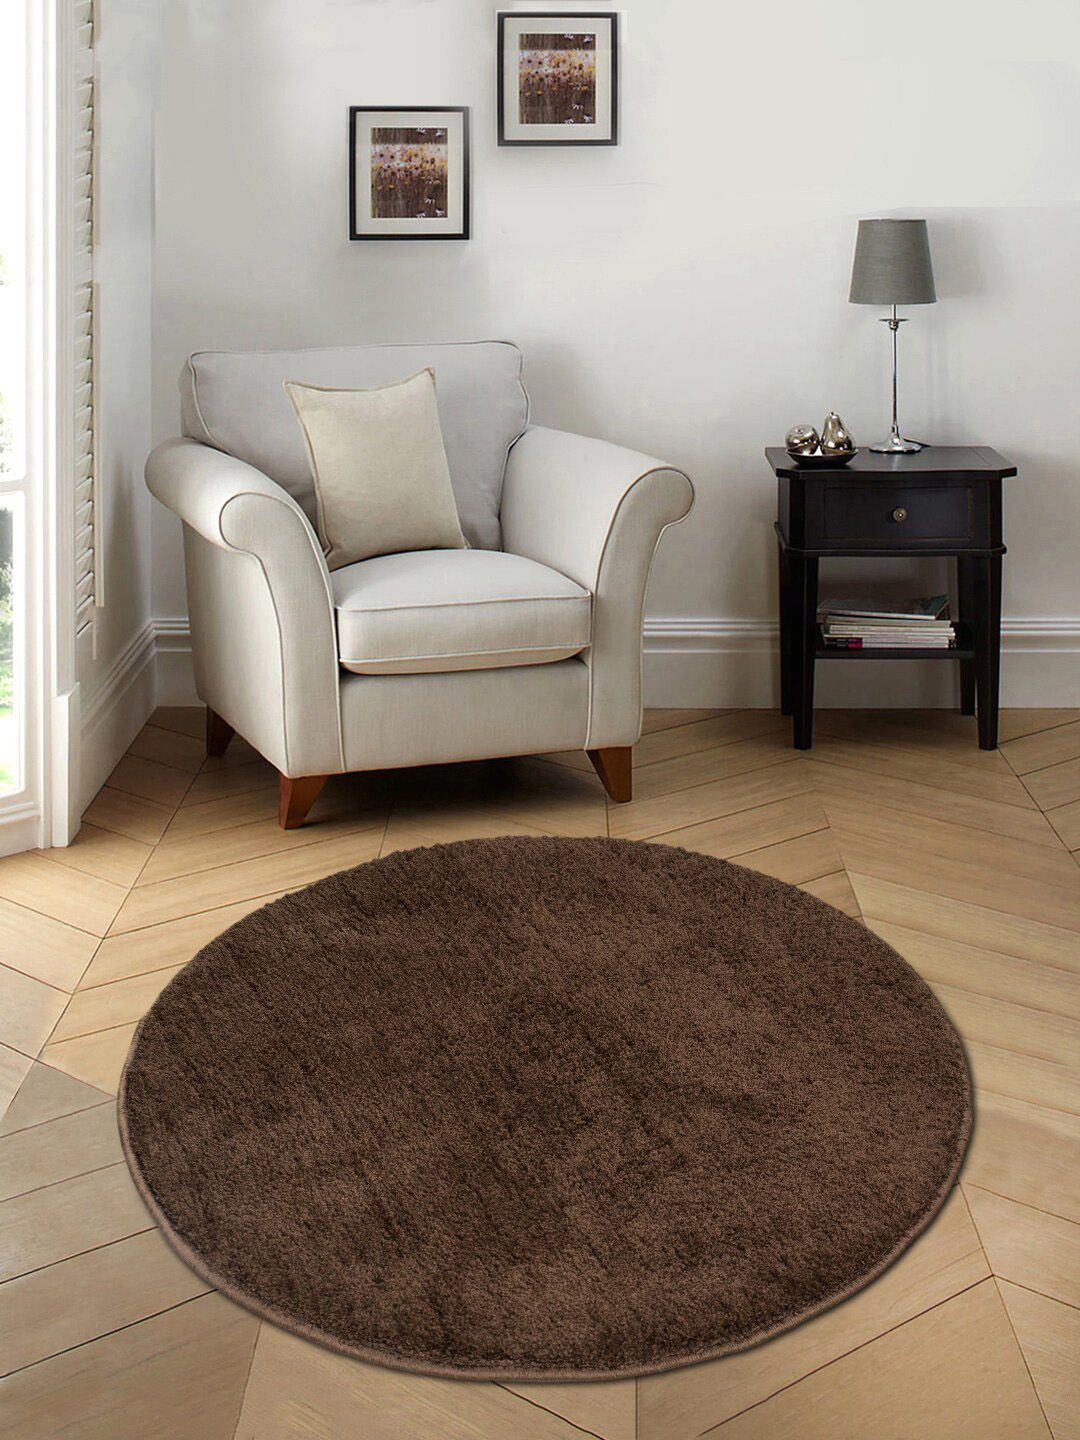 Saral Home Brown Solid Cotton Anti-Skid Shaggy Round Floor Mat Price in India